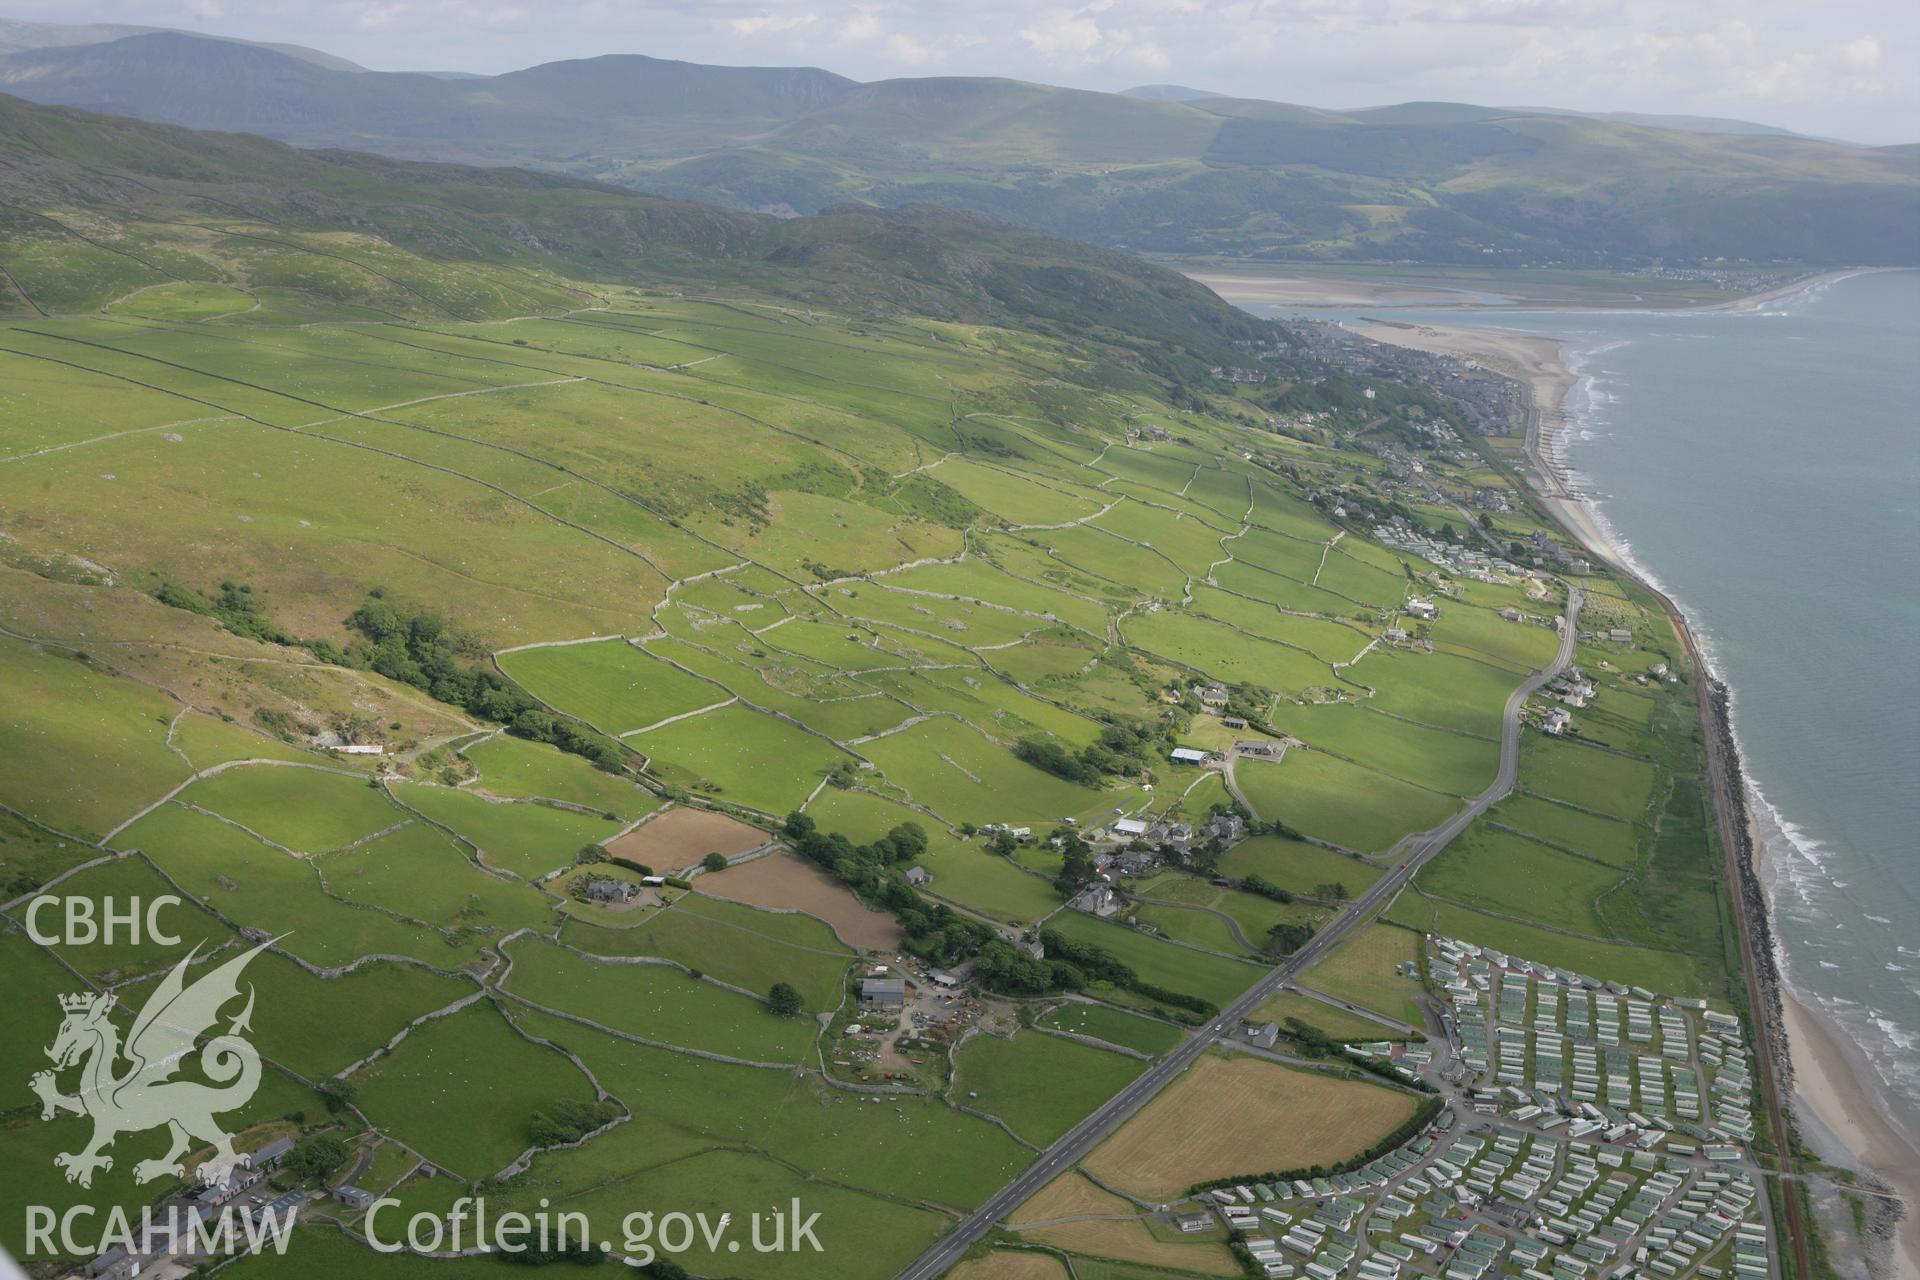 RCAHMW colour oblique photograph of landscape looking south towards Llanaber. Taken by Toby Driver on 13/06/2008.